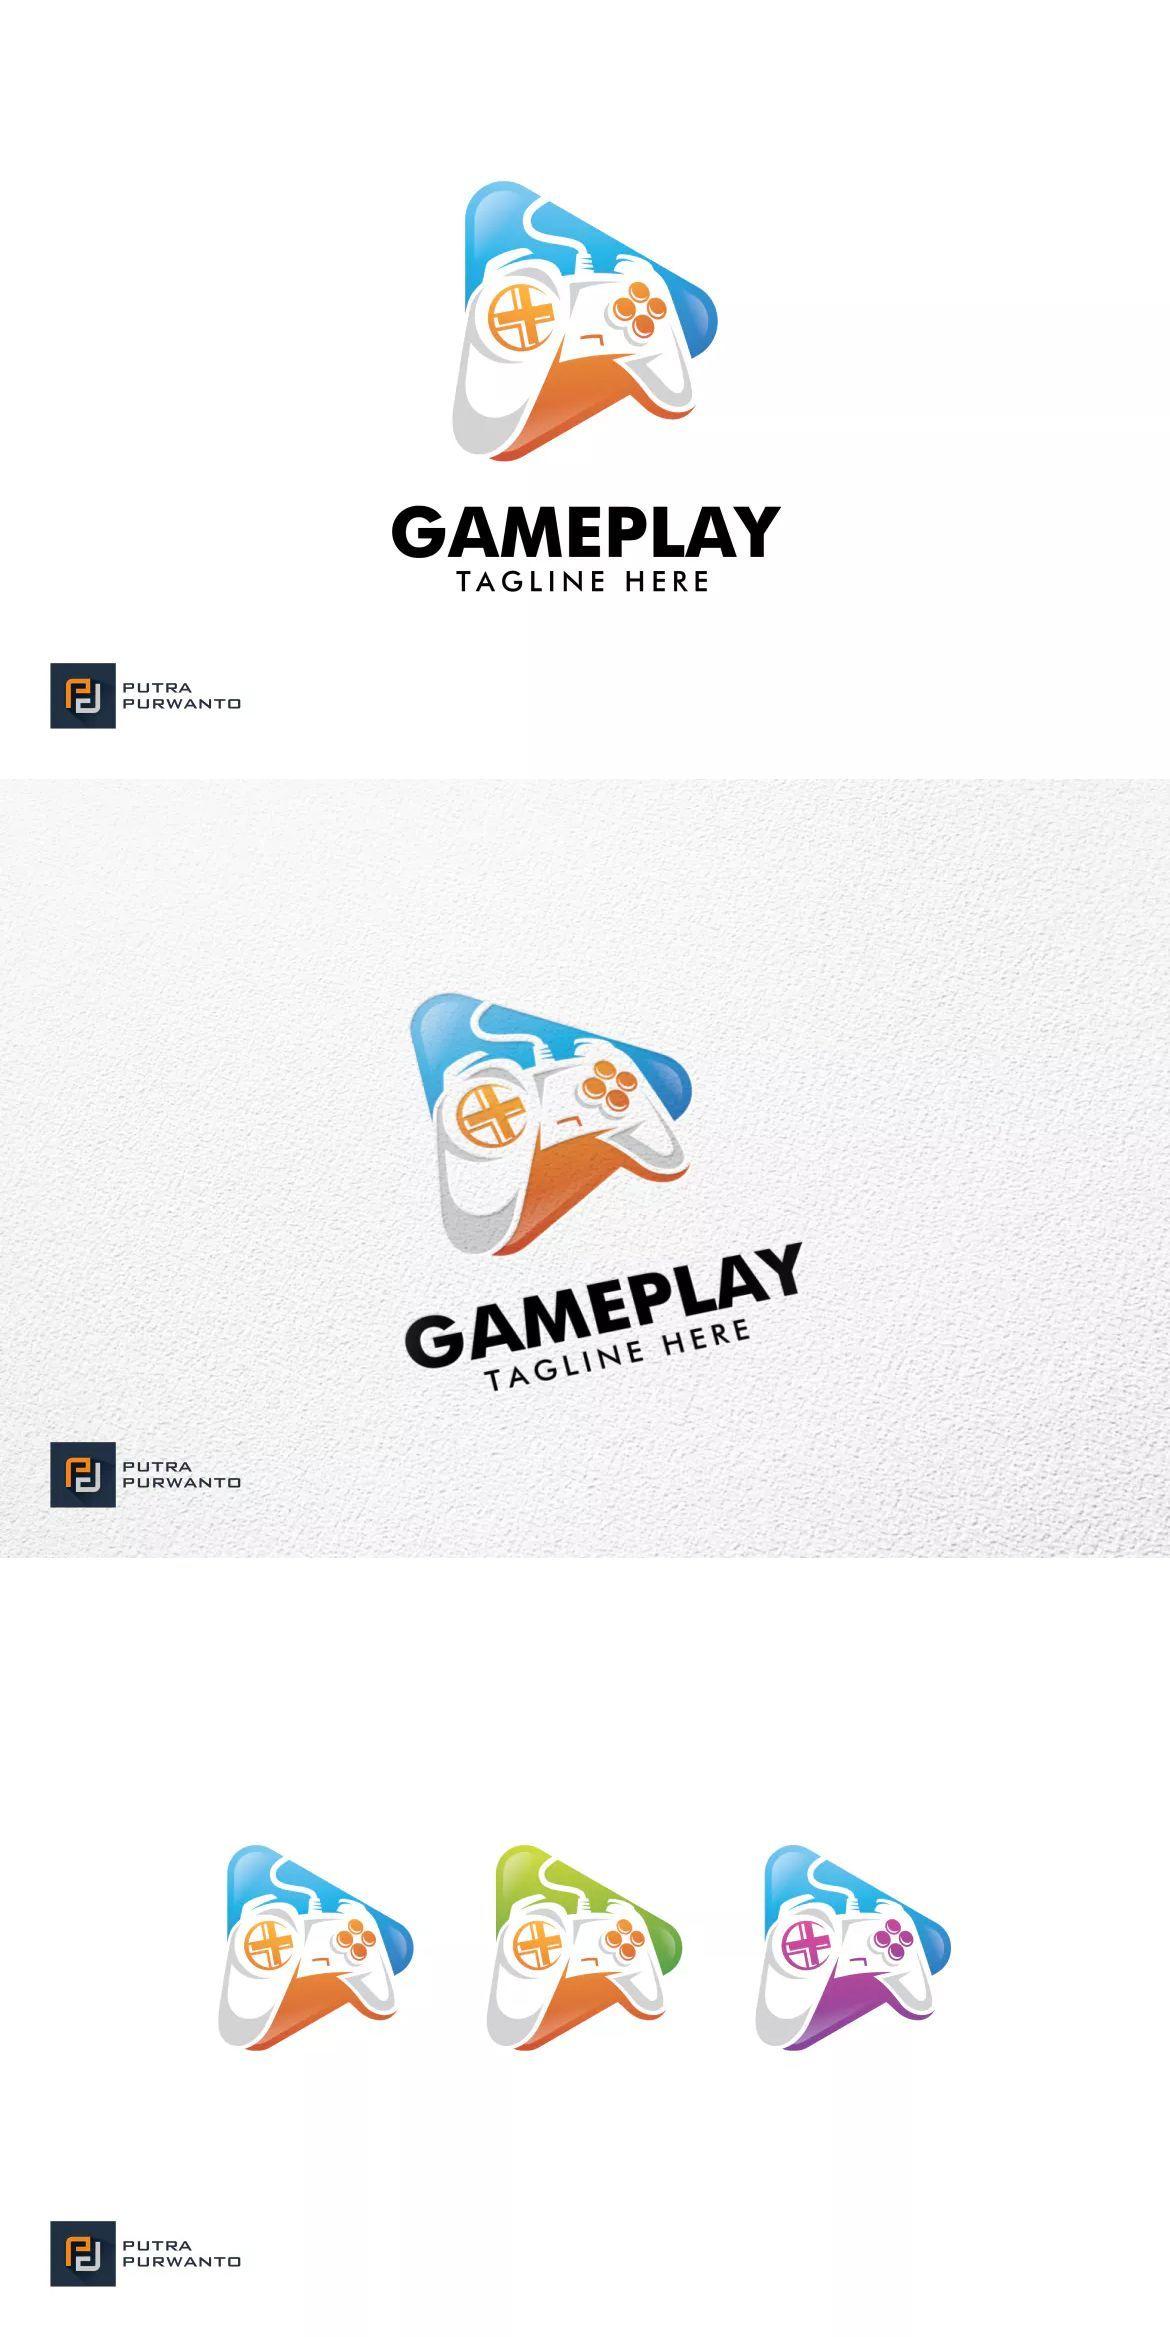 Gameplay Logo - Gameplay - Logo Template AI, EPS - 3 colour variations - 100% Re ...